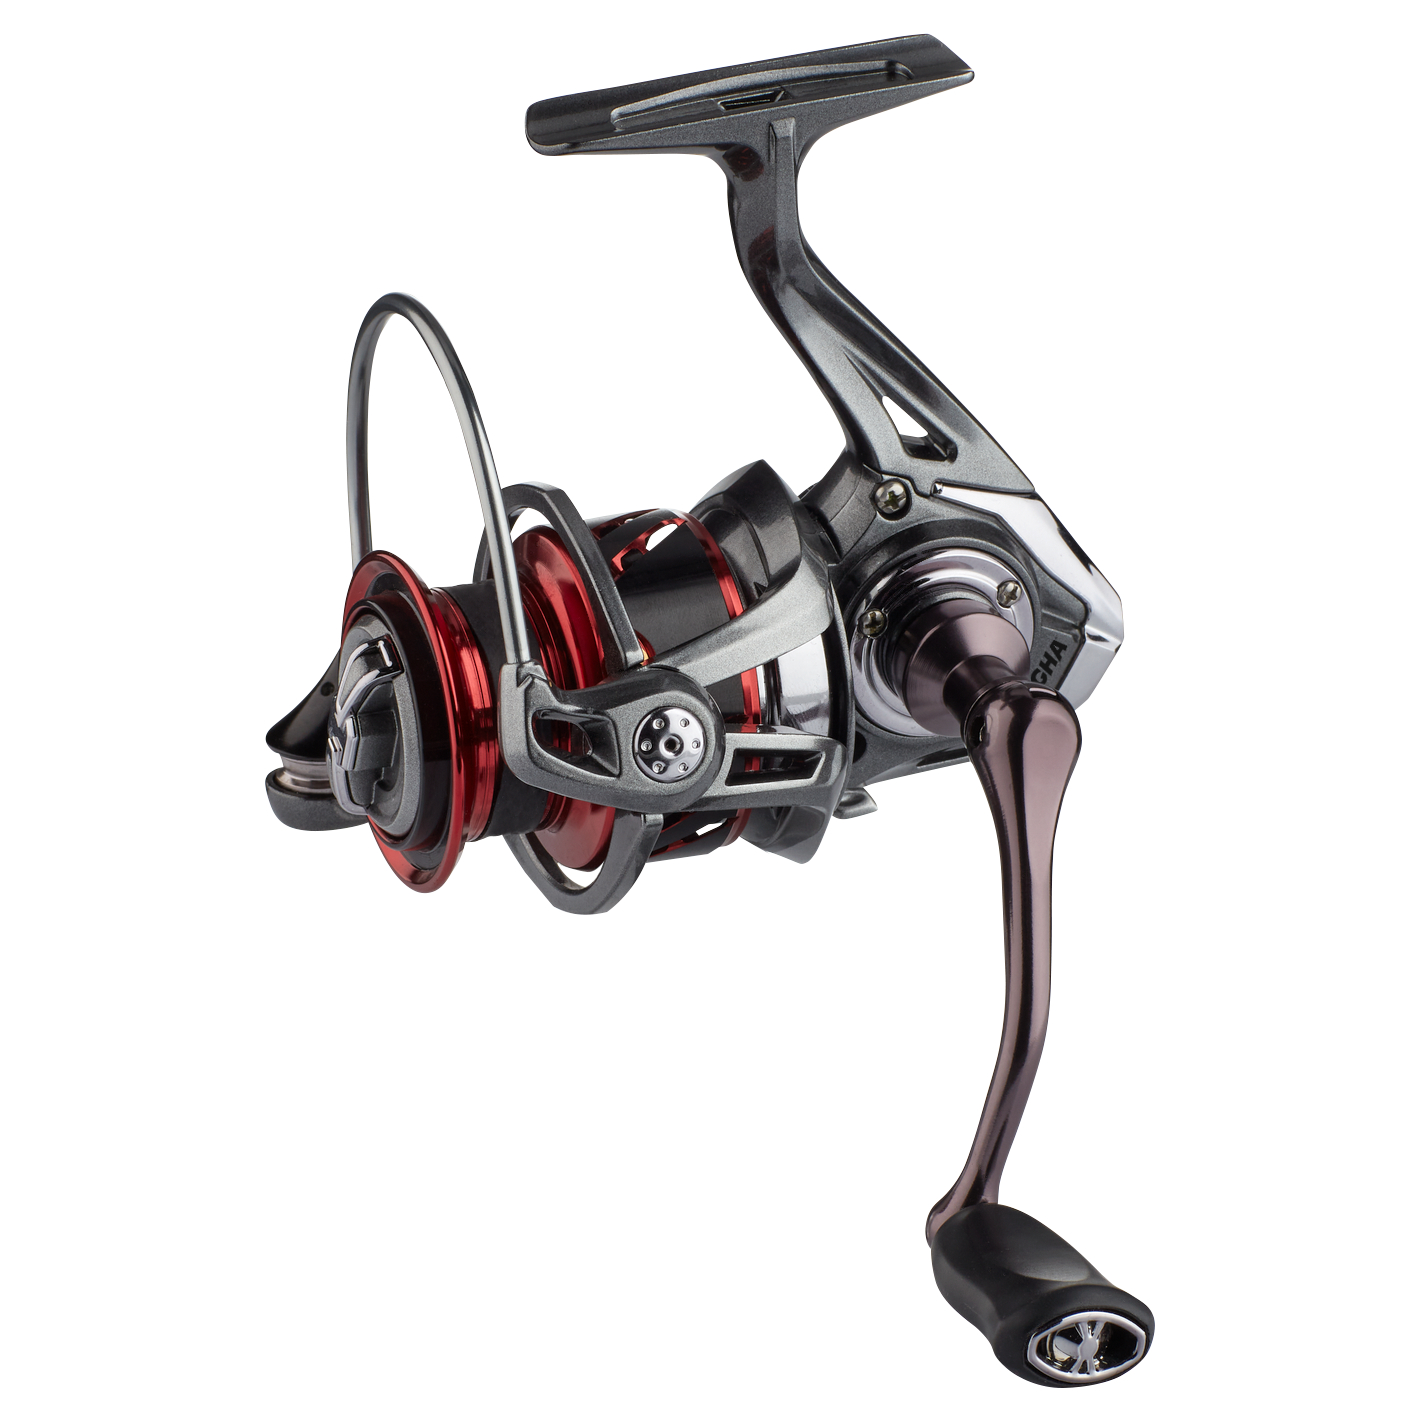 Kogha Spinning reel Askor Ultracast at low prices